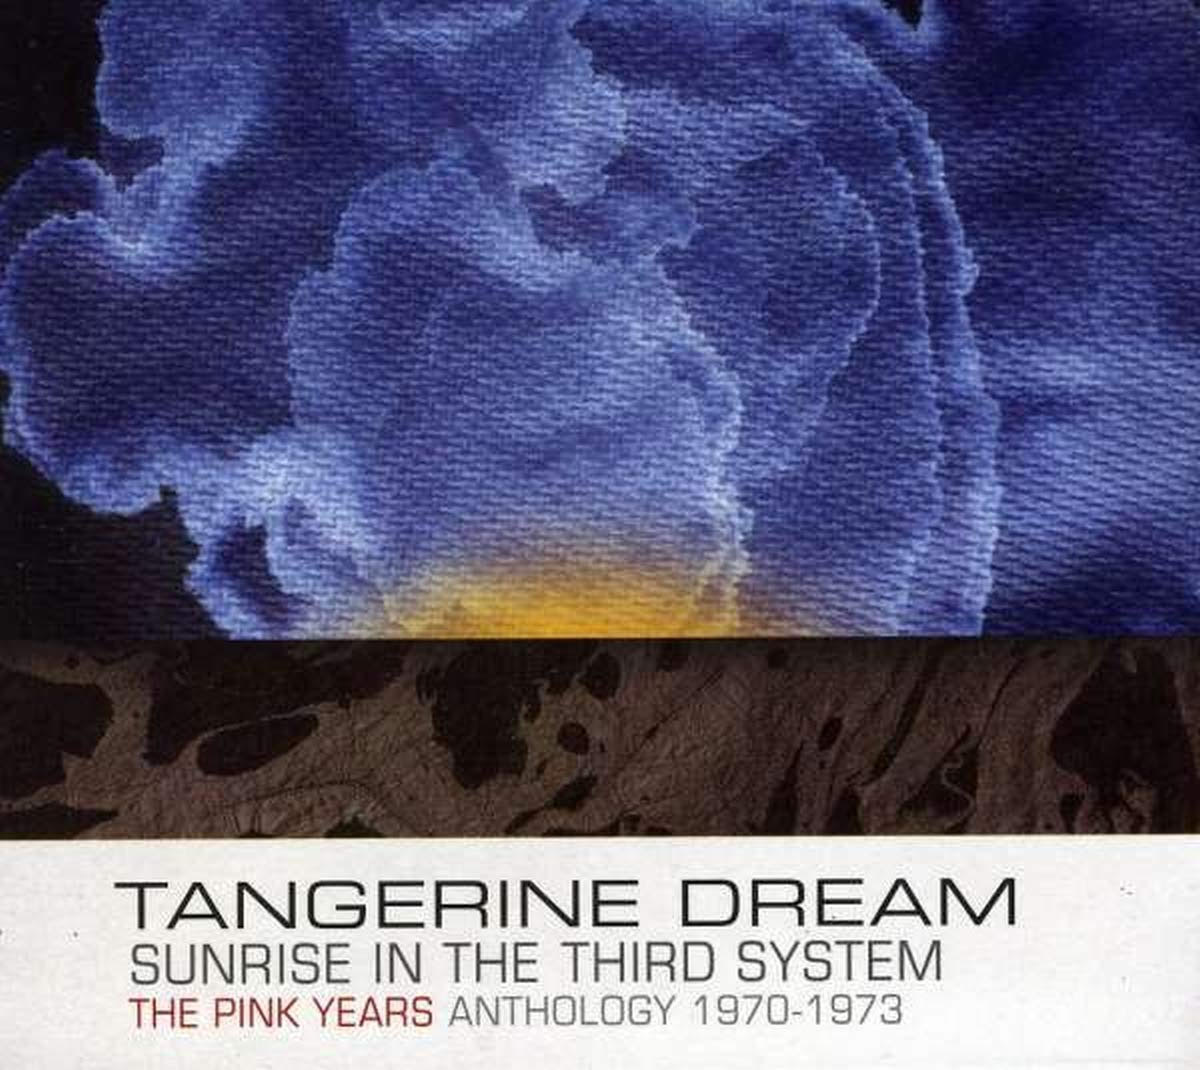 Tangerine Dream - Sunrise in the Third System – The Pink Years Anthology 1970-1973 (2 CD  - Import)